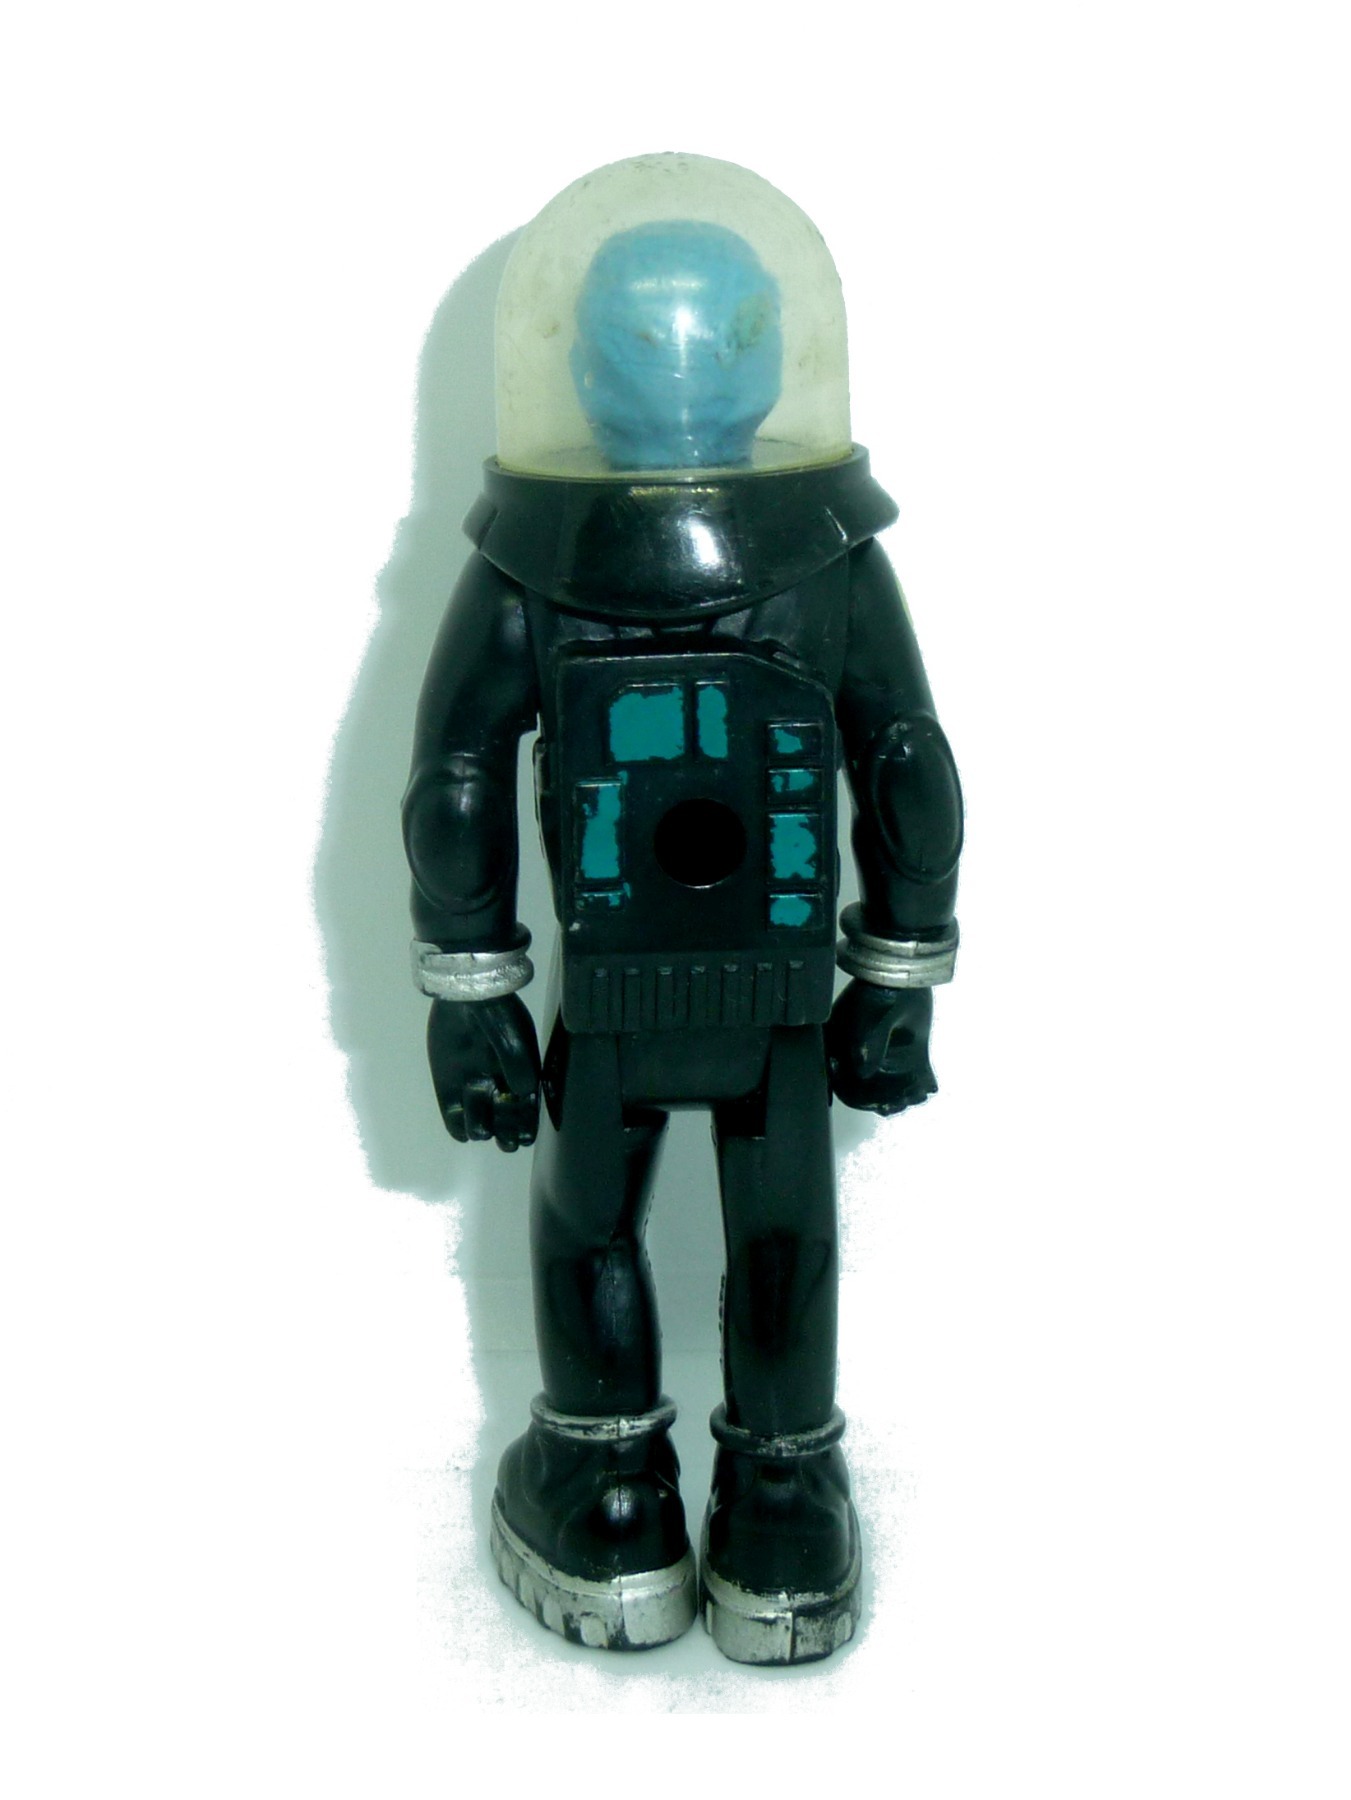 Astronaut / Space Figure 1979 Fisher Price Toys 3